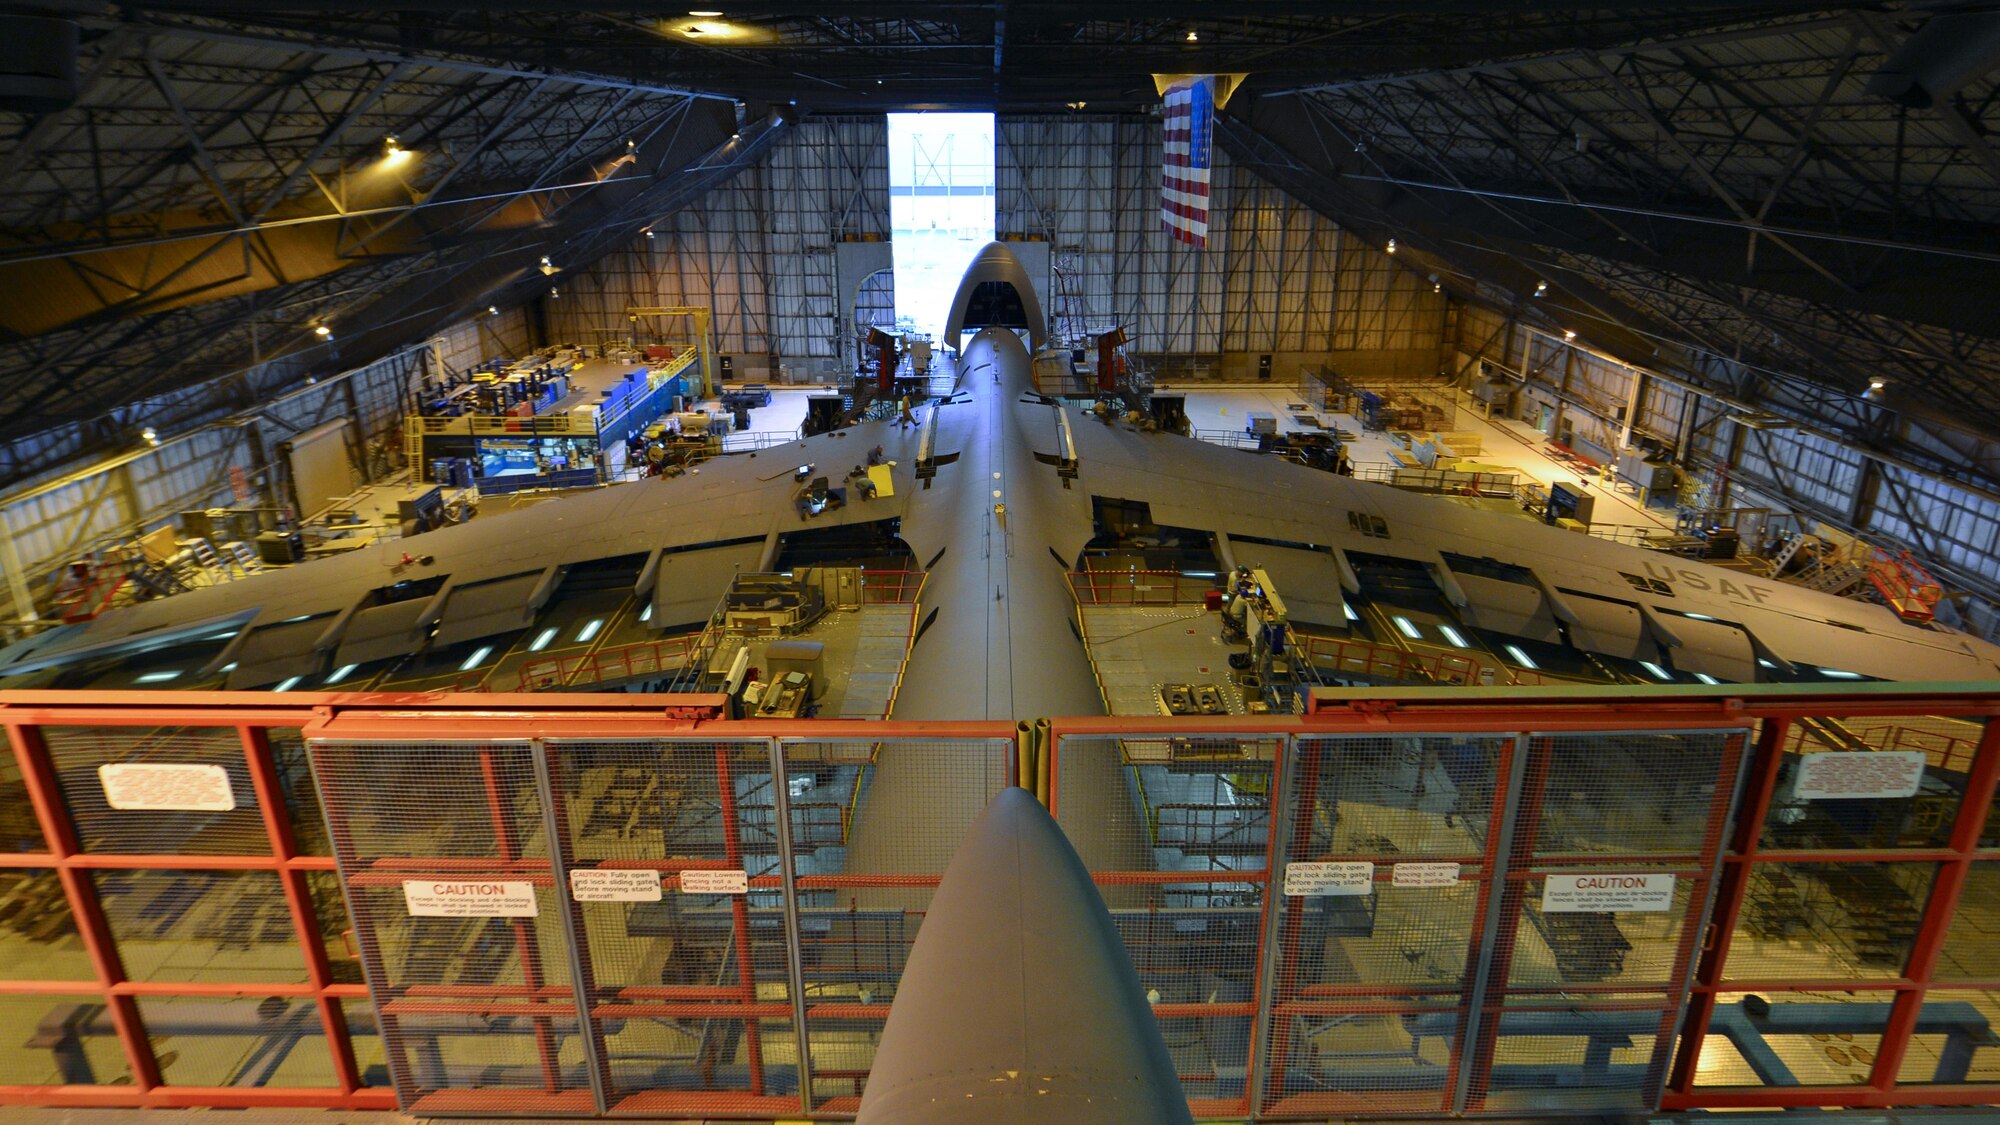 A Team Dover C-5M Super Galaxy undergoes a Maintenance Steering Group-3 Major inspection Dec. 2, 2015, in the isochronal dock of the 436th Maintenance Squadron at Dover Air Force Base, Del. A major ISO inspection takes approximately 55 days and more than 100 maintainers can be working on the aircraft at any given time. (U.S. Air Force photo/Senior Airman William Johnson)